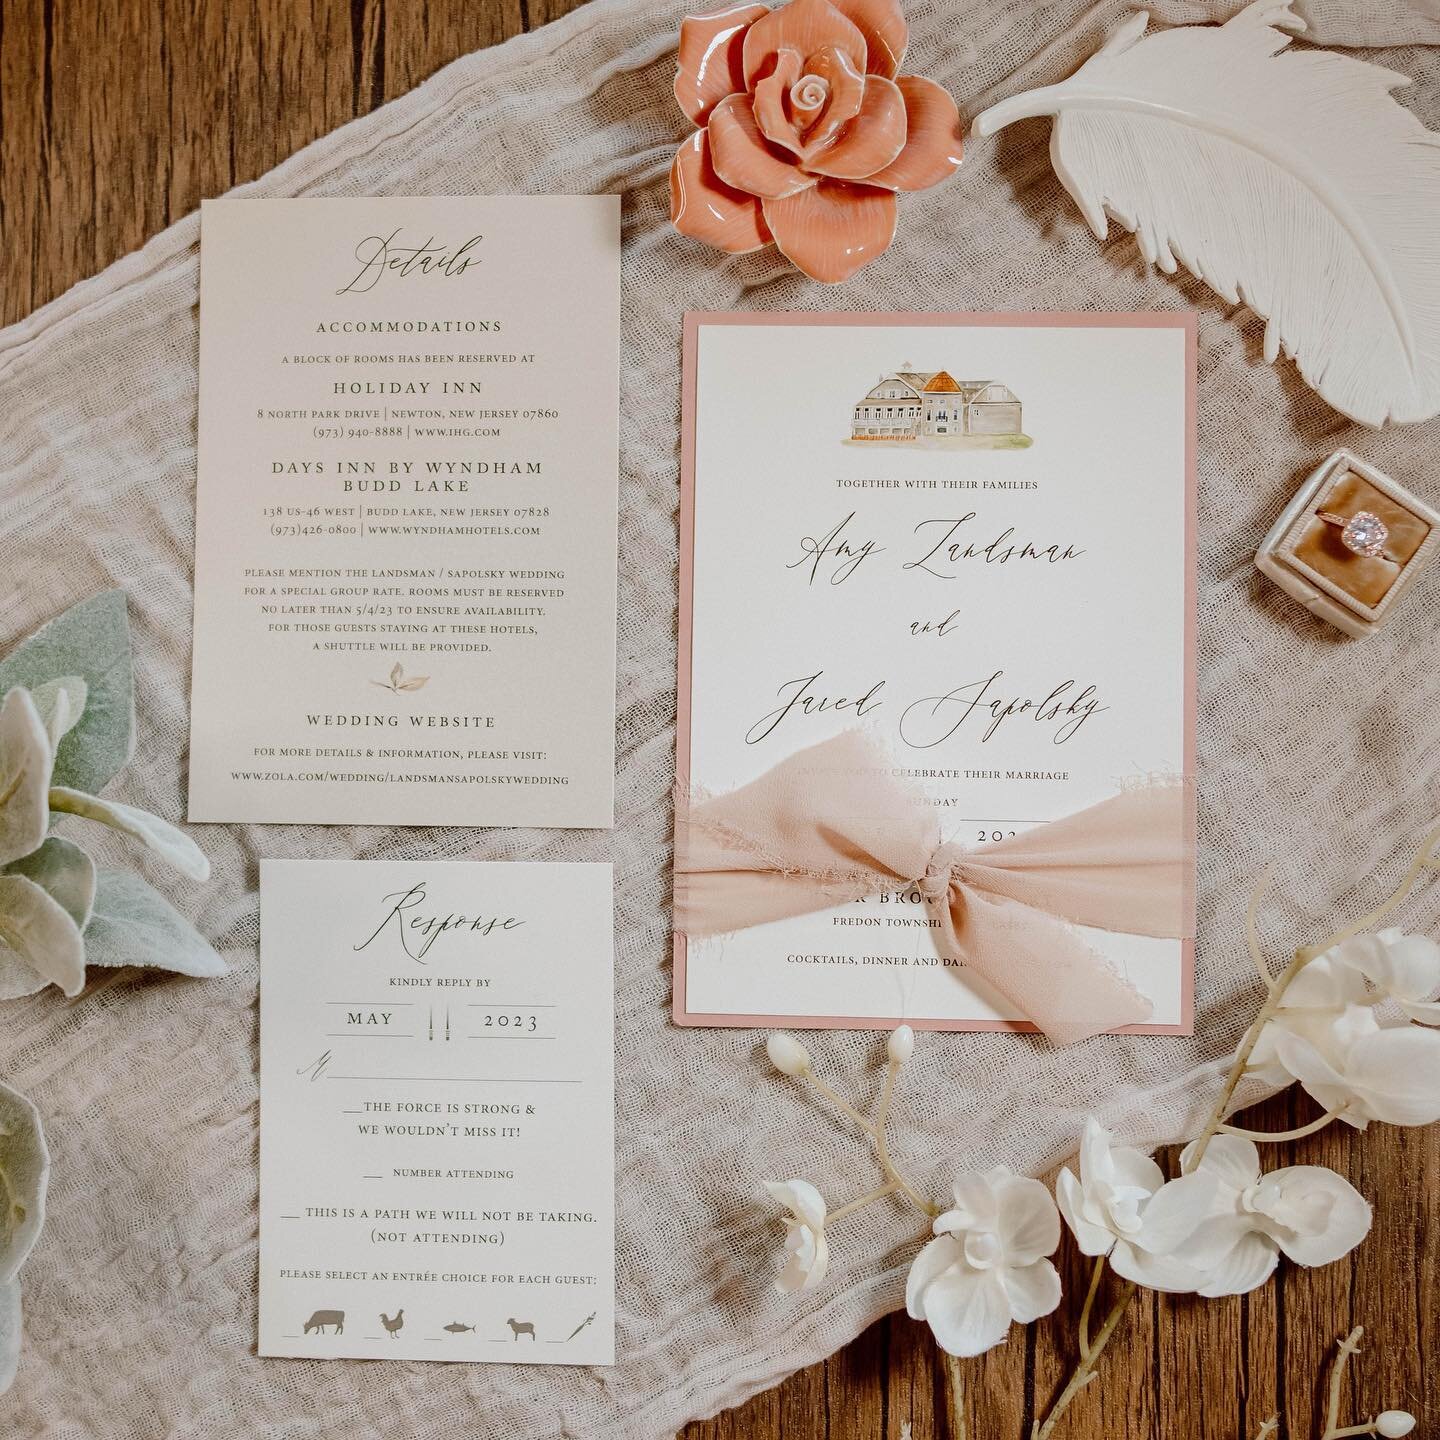 How to set the mood for your summer wedding celebration with dusty pinks and gorgeous details 🎀🌸💓

Congratulations Amy and Jared we cannot wait for your June wedding at @bearbrookvalley ✨✨✨
.
.
.

#njweddingstationery#njbridemagazine#goldfoil#gold